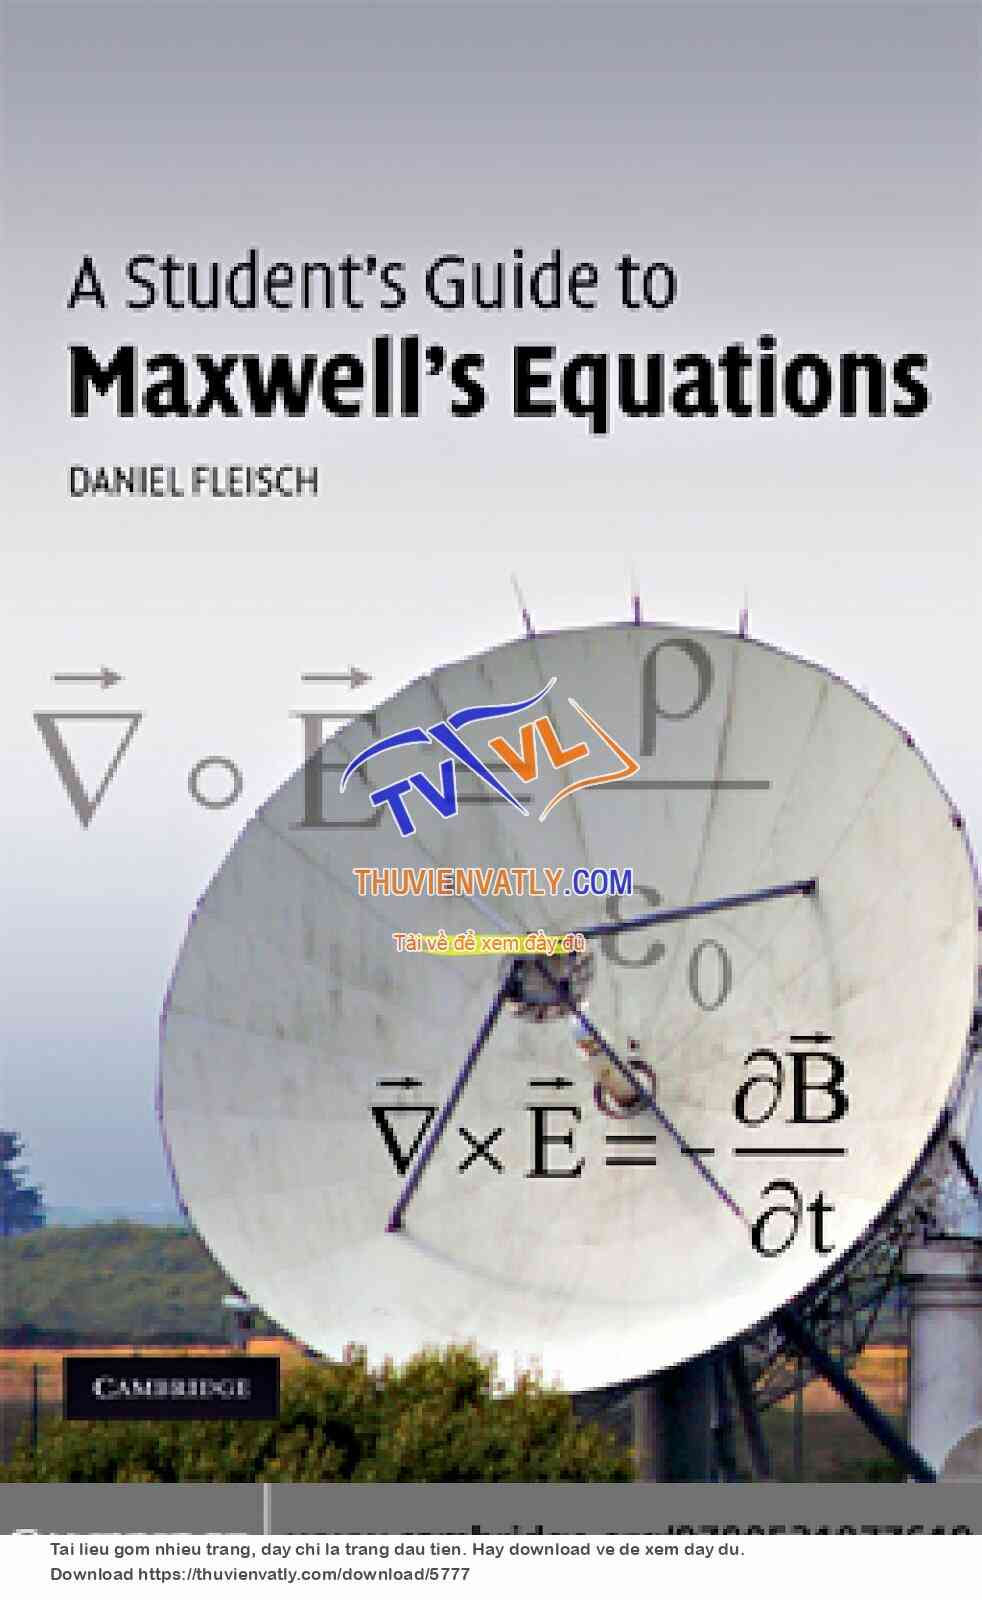 A Student’s Guide to Maxwell’s Equations